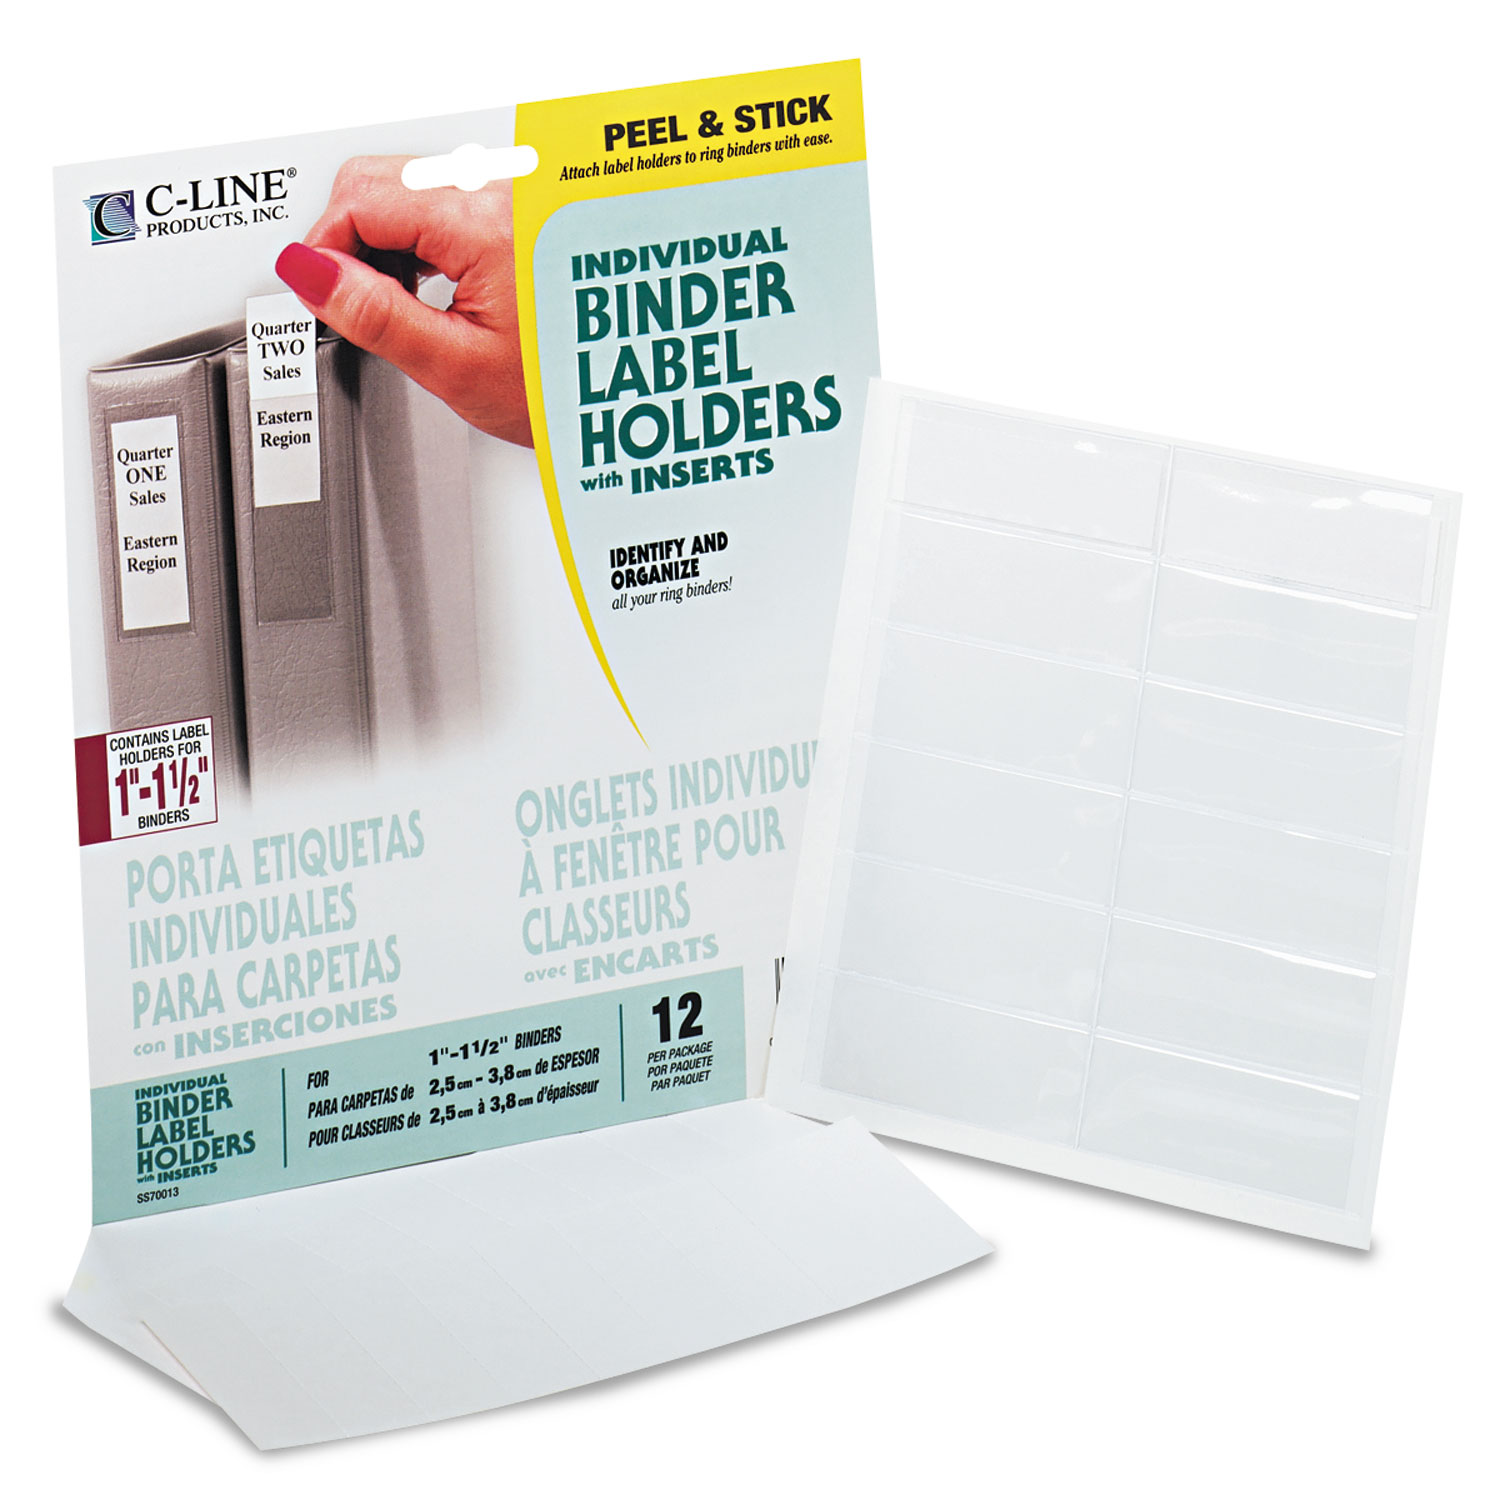 Self-Adhesive Ring Binder Label Holders, Top Load, 2 5/16 x 3 1/16, Clear, 12/PK